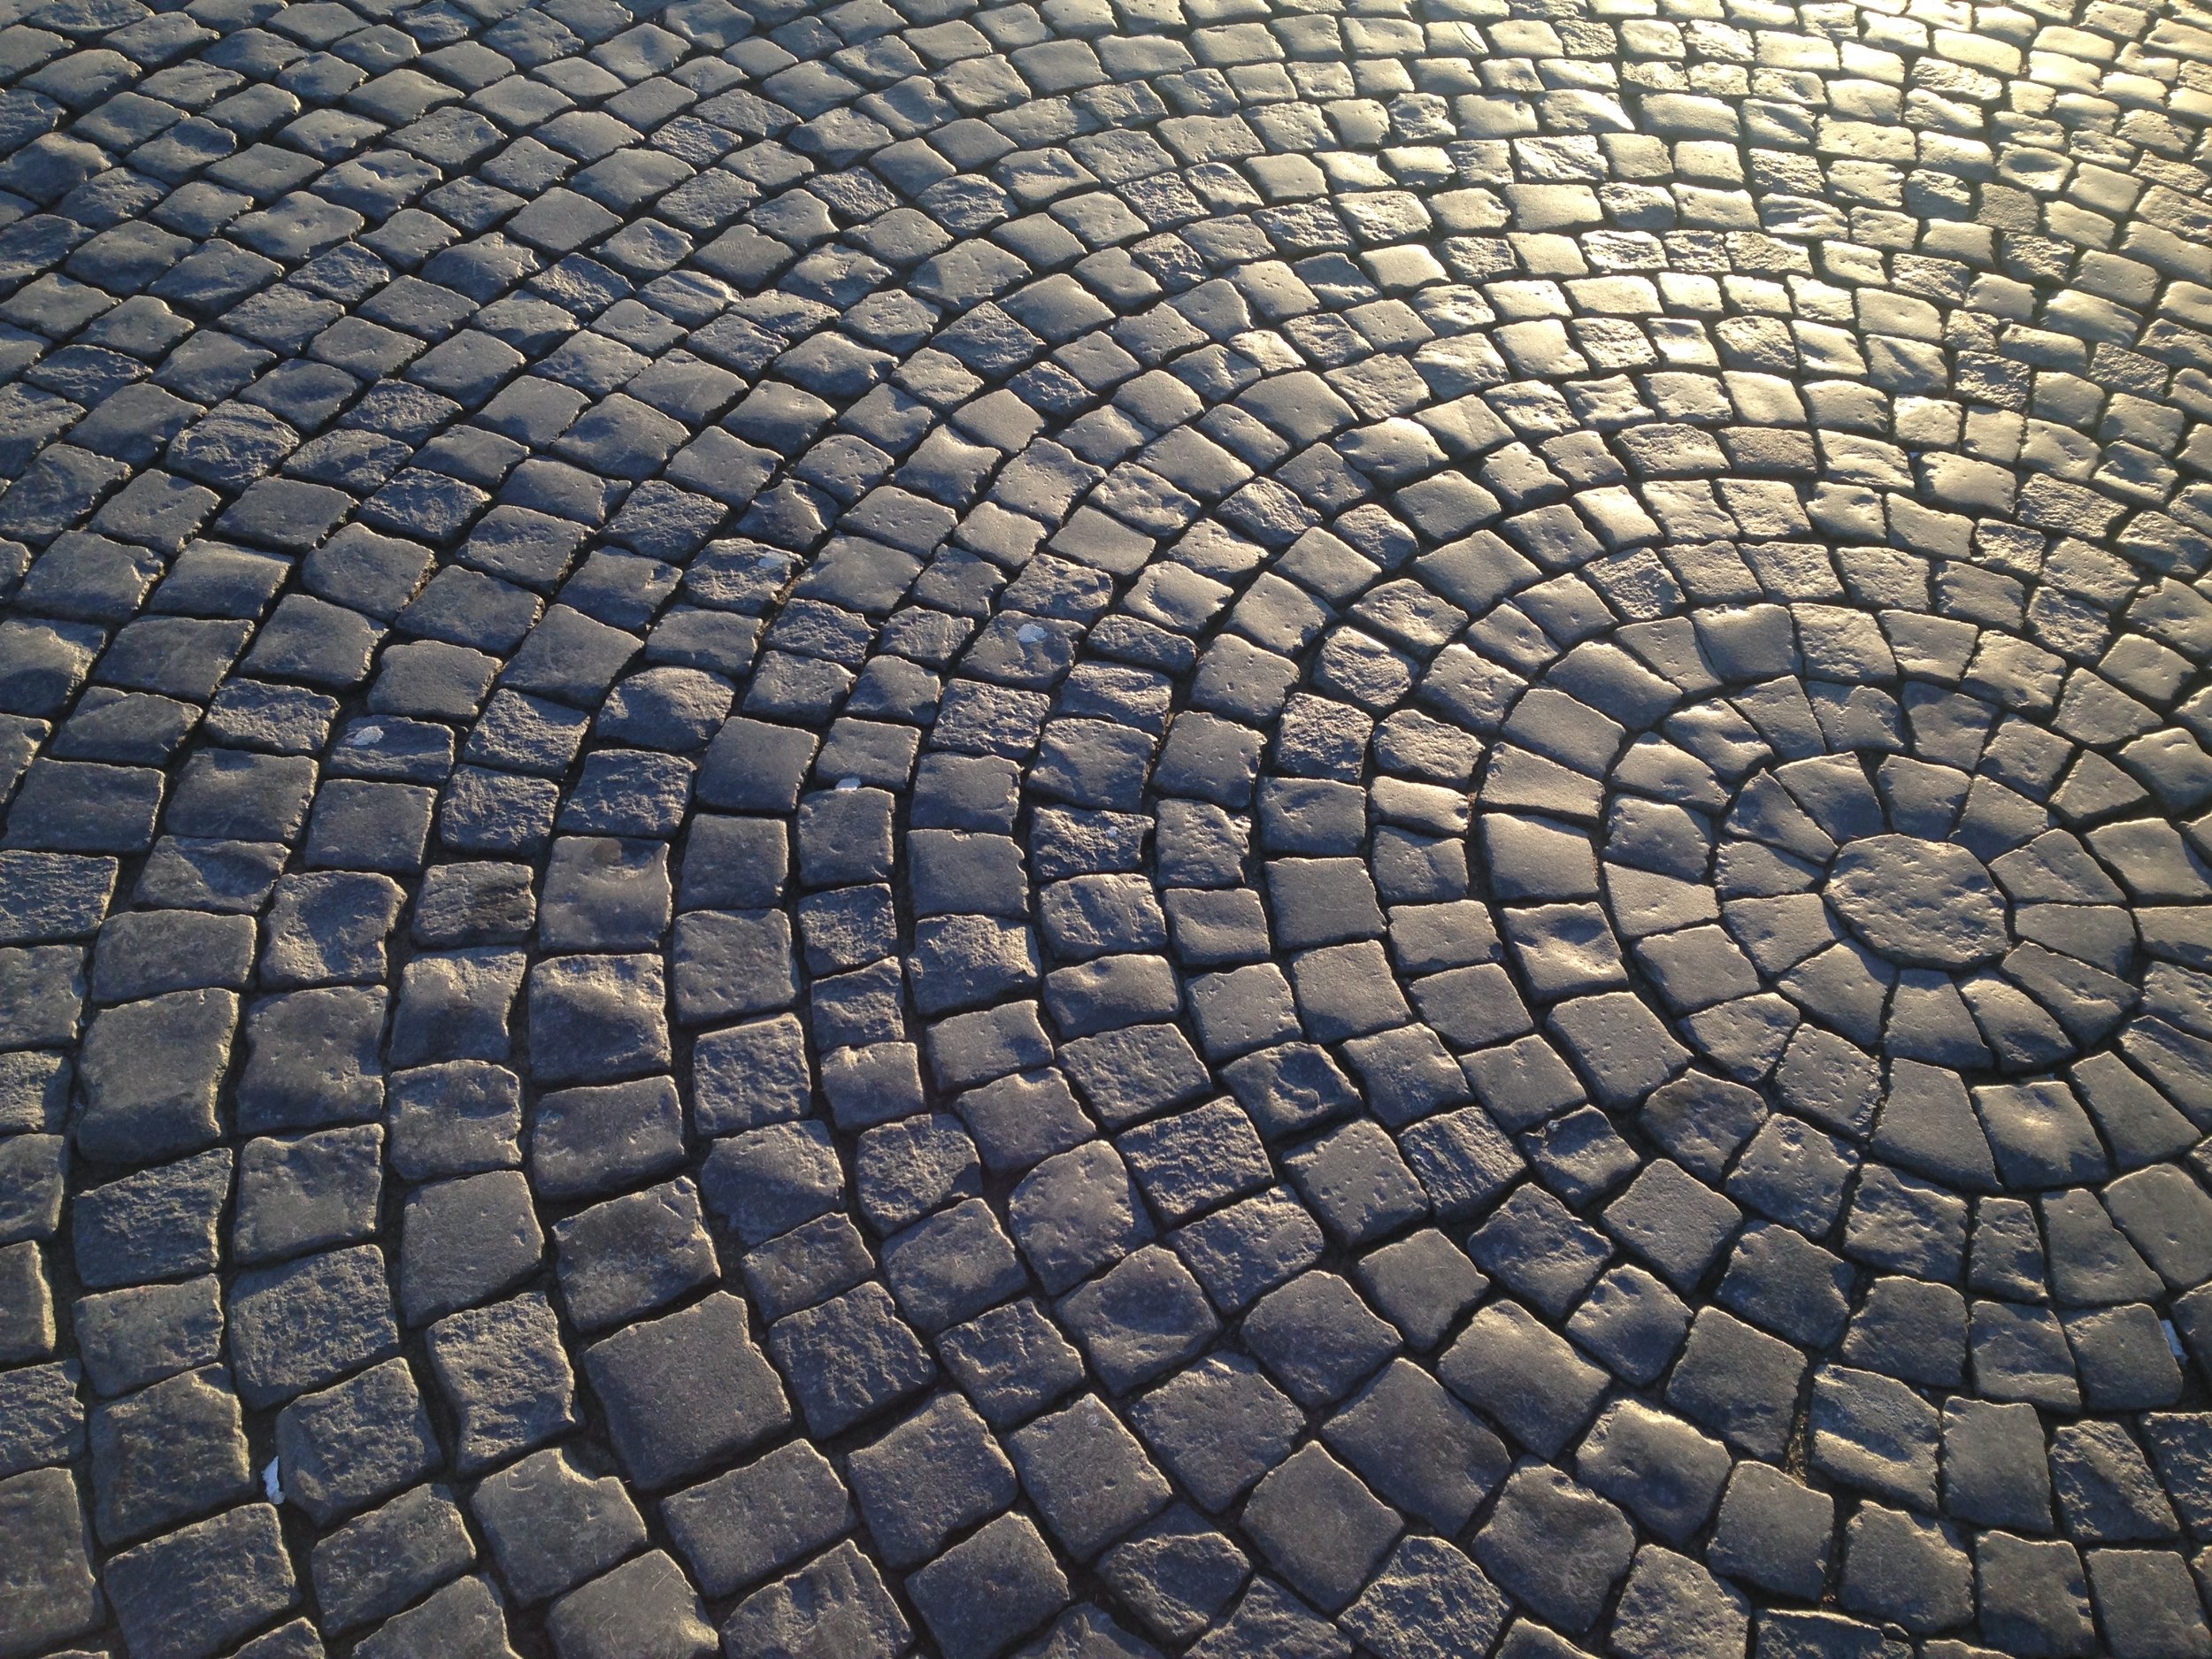 Cobblestone Street in Moscow, Russia